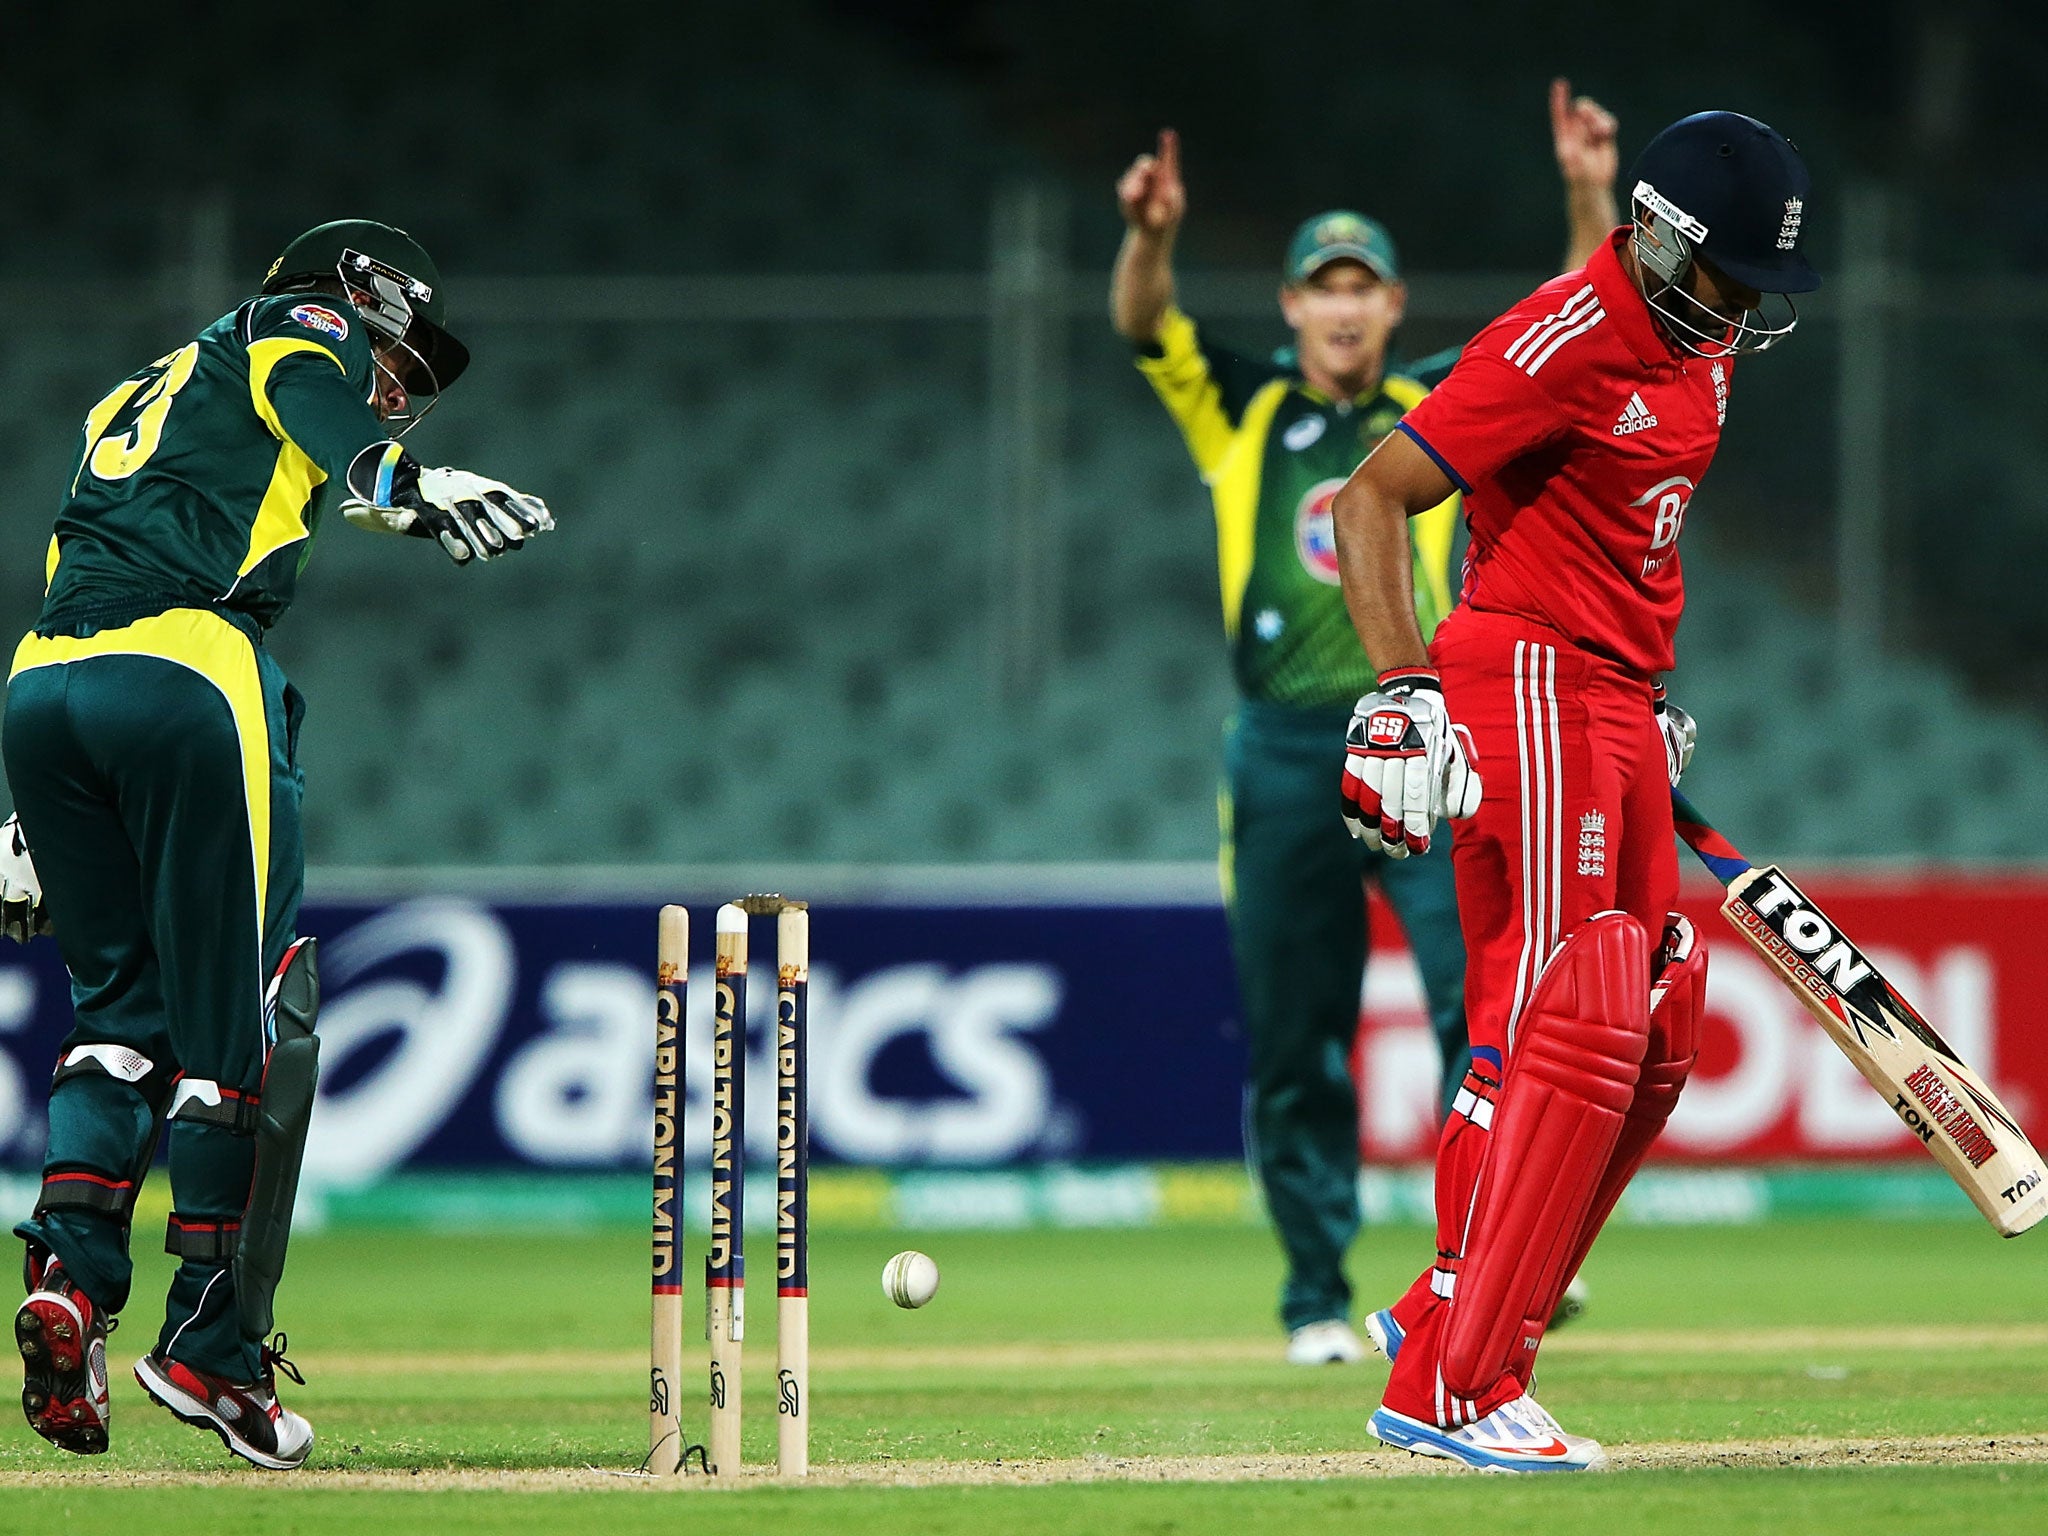 Ravi Bopara is controversially dismissed in the fifth ODI between England and Australia